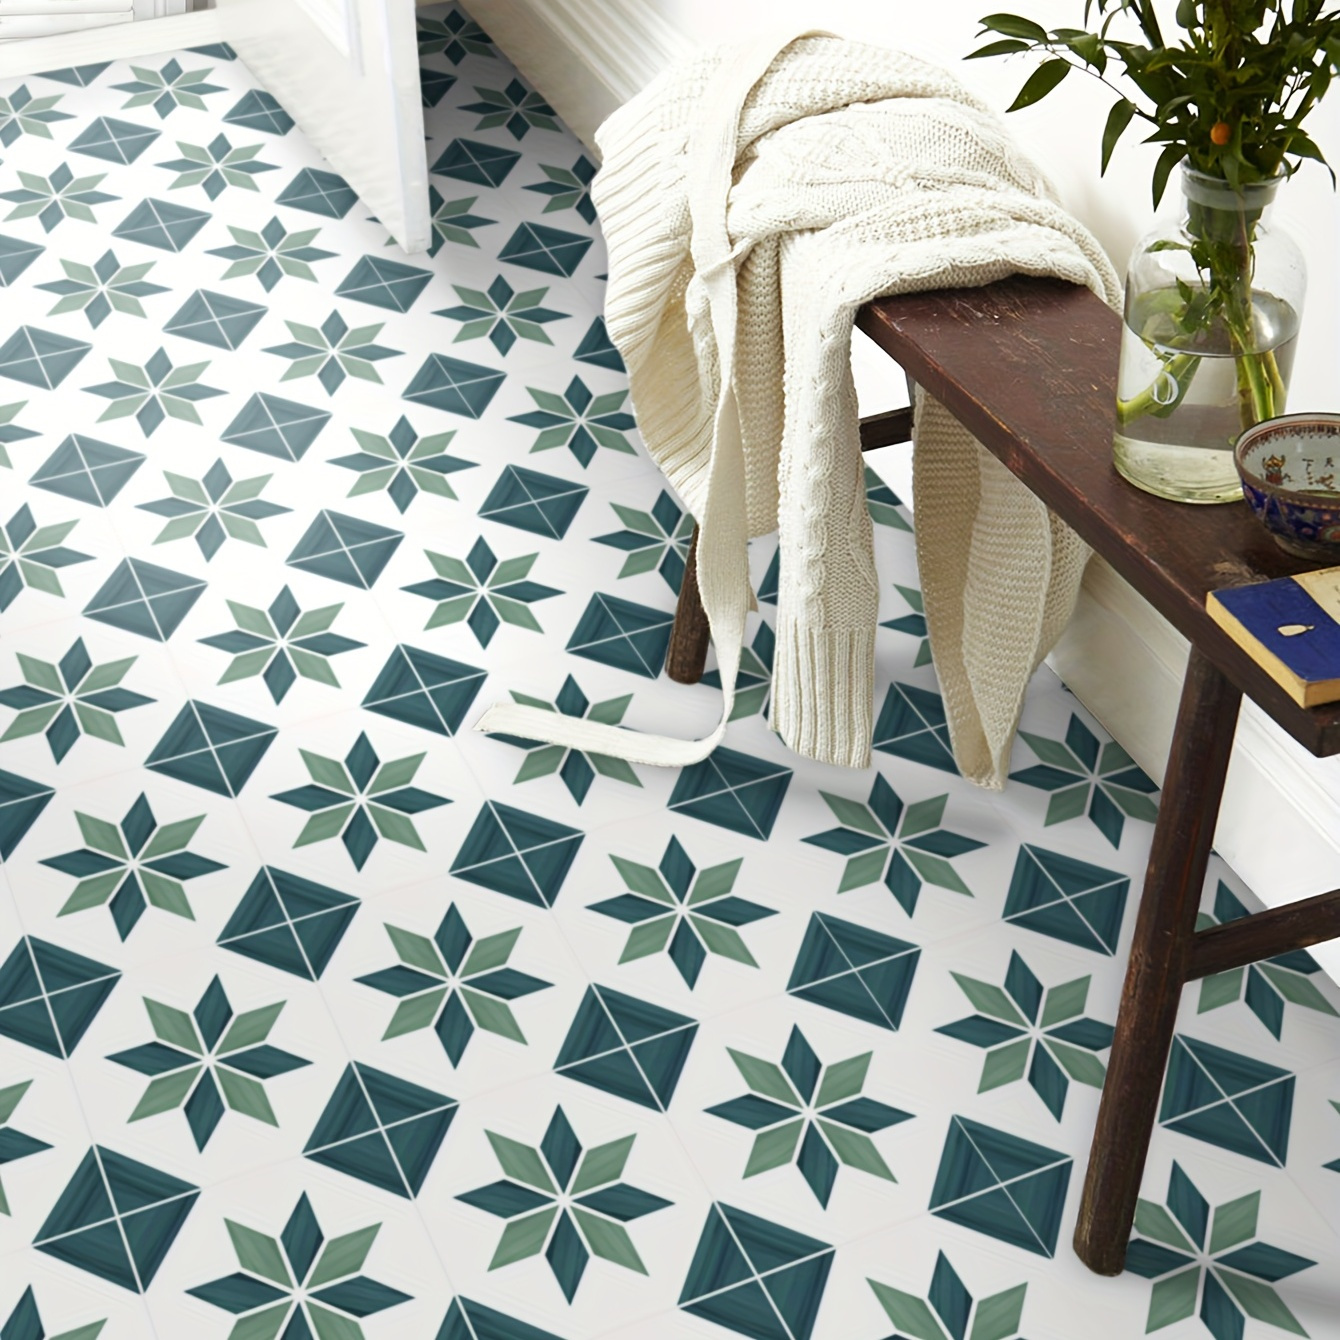 

9pcs, Peel And Stick Floor Tiles Green Mosaic Pvc Flooring Sticker Self Adhesive Floor Tile For Bathroom Kitchen Living Room 7.87x7.87" Waterproof Tile Sticker Easy To Use, Hot Sale In Spring